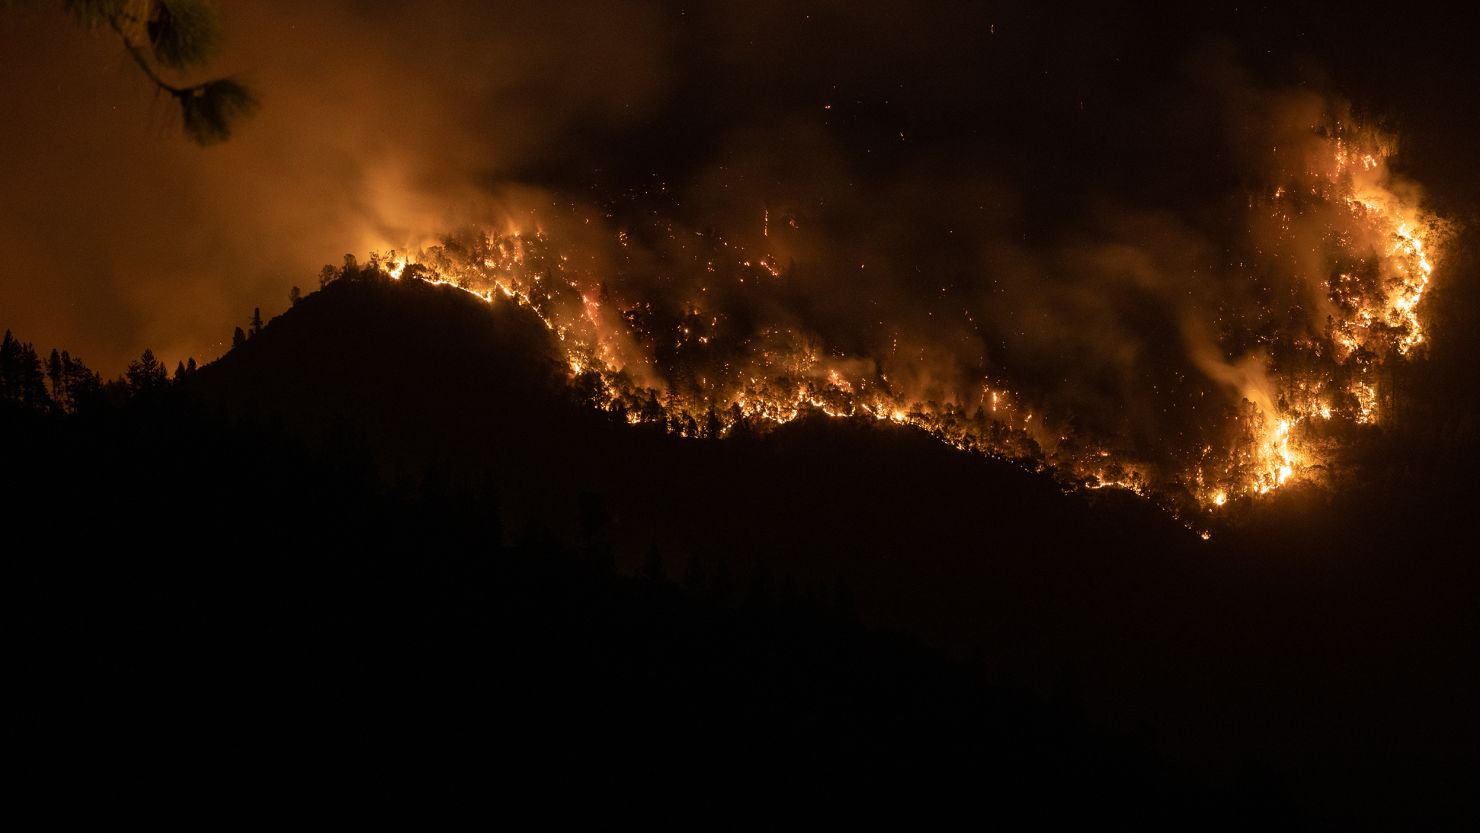 Flames from the wildfire in Foresthill, California, on September 10, 2022. Thousands of homes are threatened by the multi-county wildfire and over 11,000 evacuated as fire activity expected to increase.